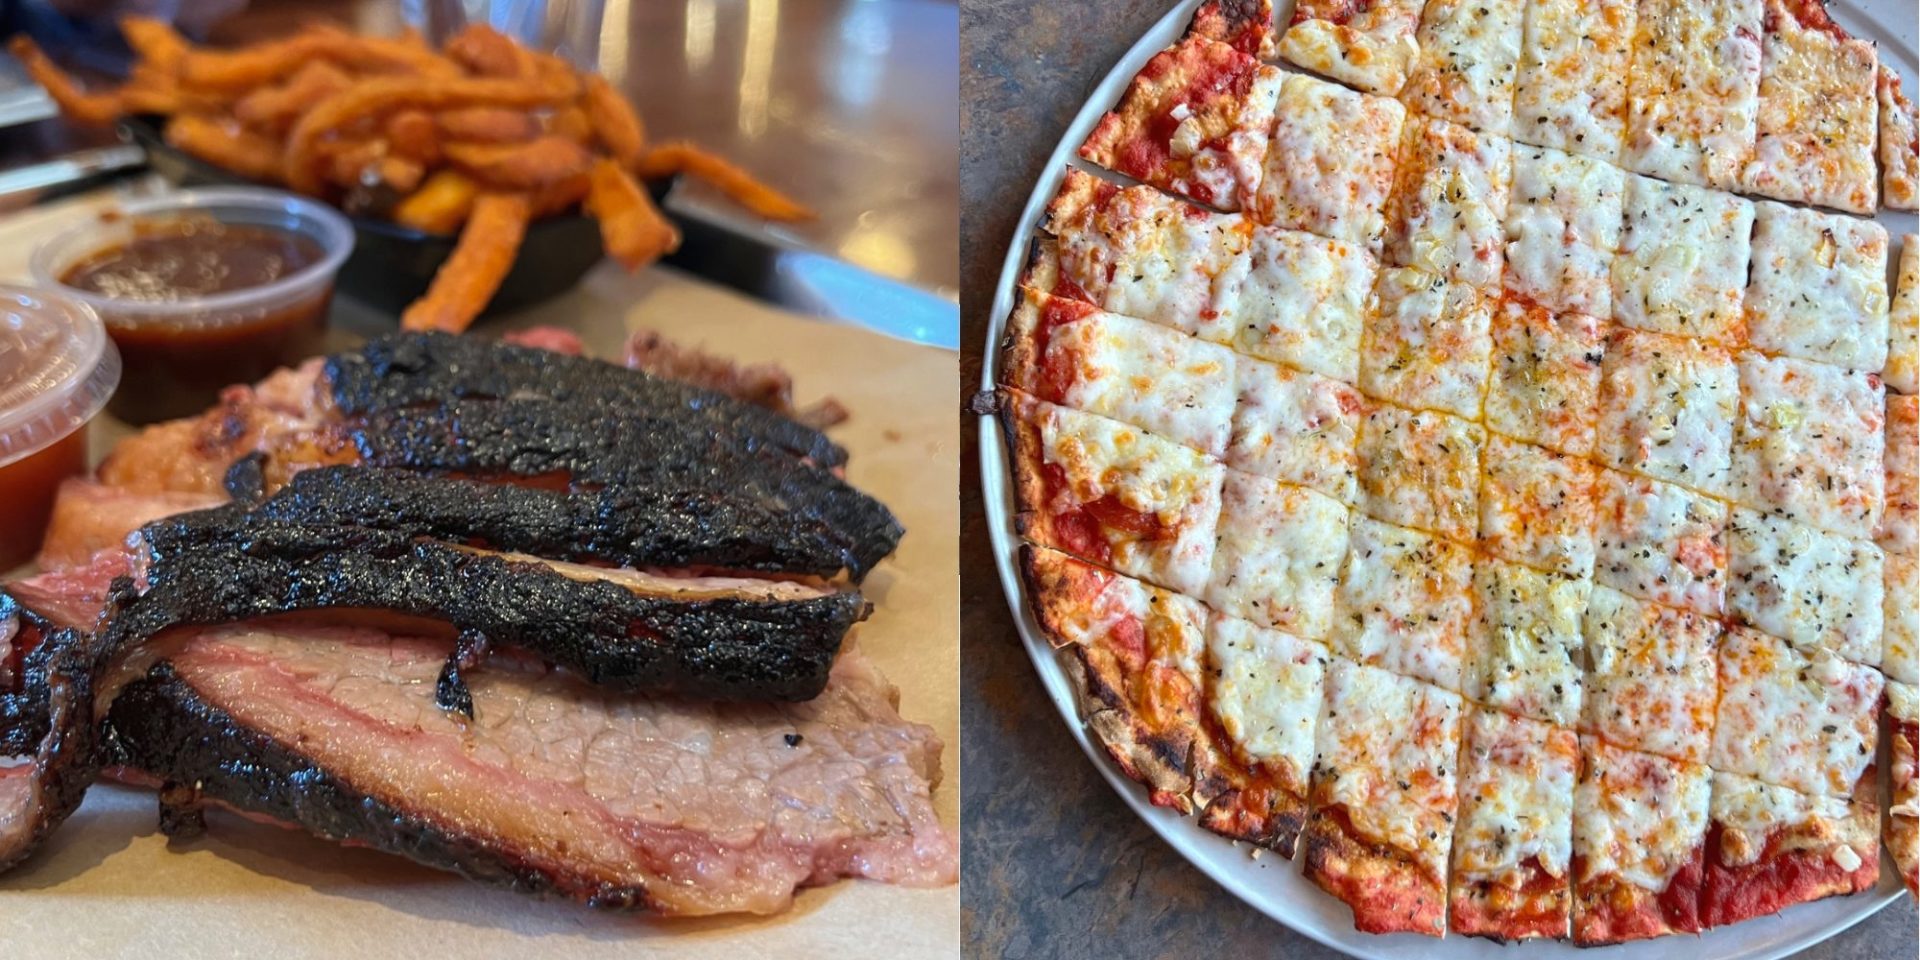 Burnt ends at Black Dog and thin-crust pizza at Old Orchard